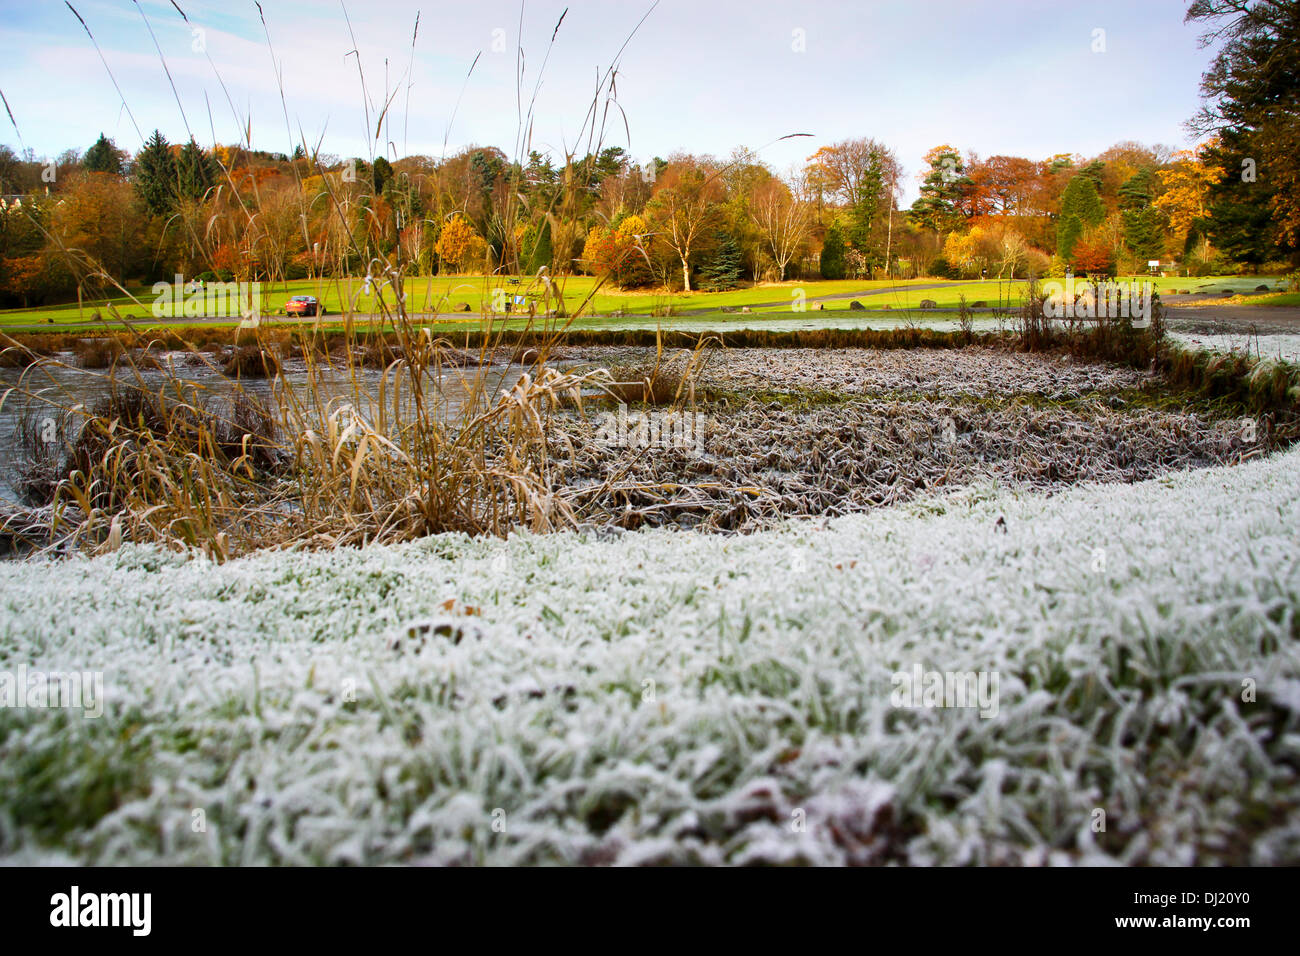 Kilsyth, Glasgow, UK. 19th November 2013. Heavy frost dusts the grass with autumn colours in the background.  Colzium Park Kilsyth. Credit:  ALAN OLIVER/Alamy Live News Stock Photo